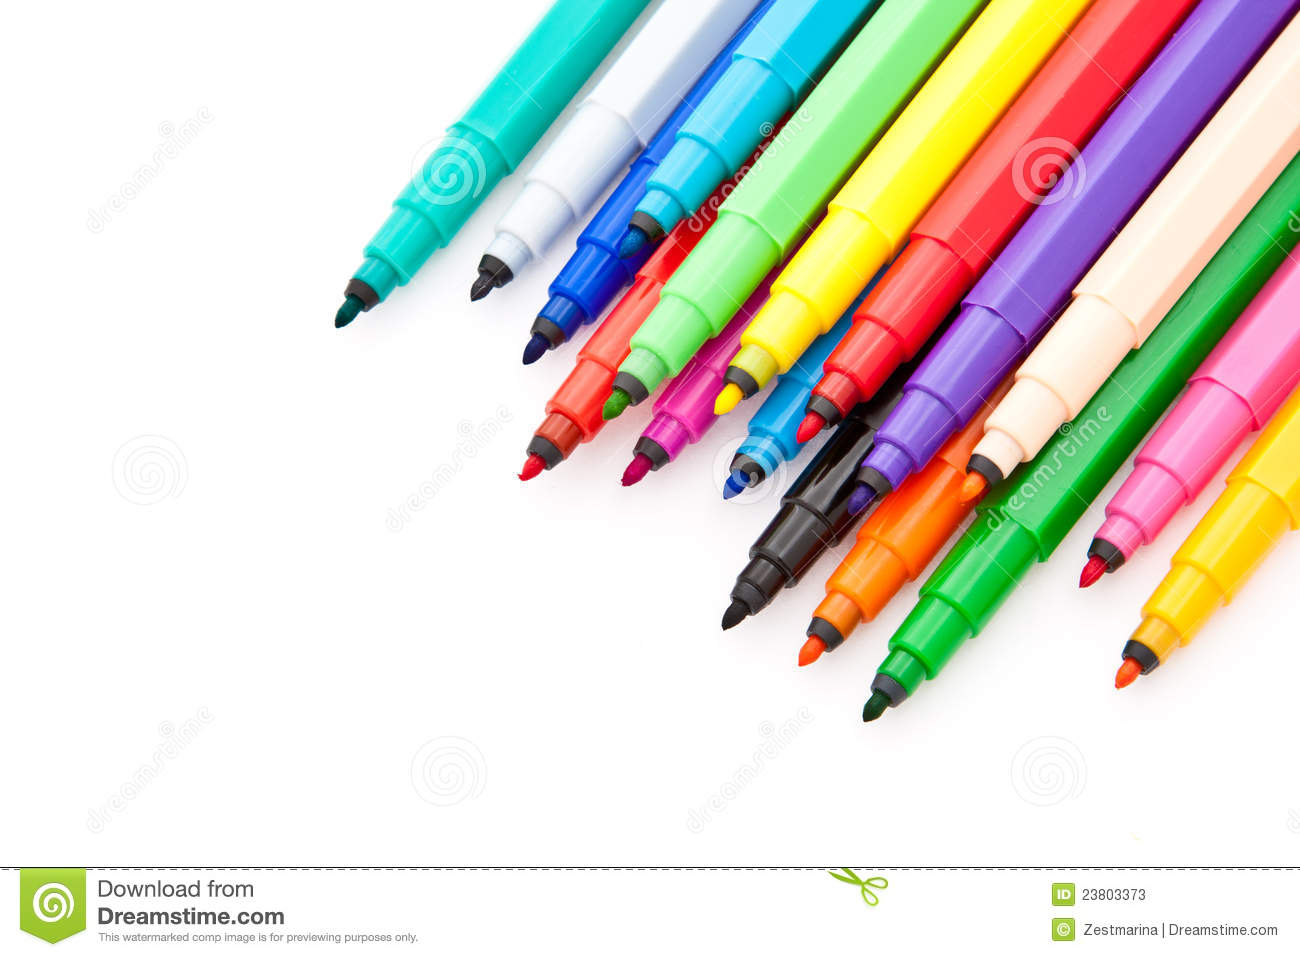 Crayola Colored Pencil Clipart   Clipart Panda   Free Clipart Images